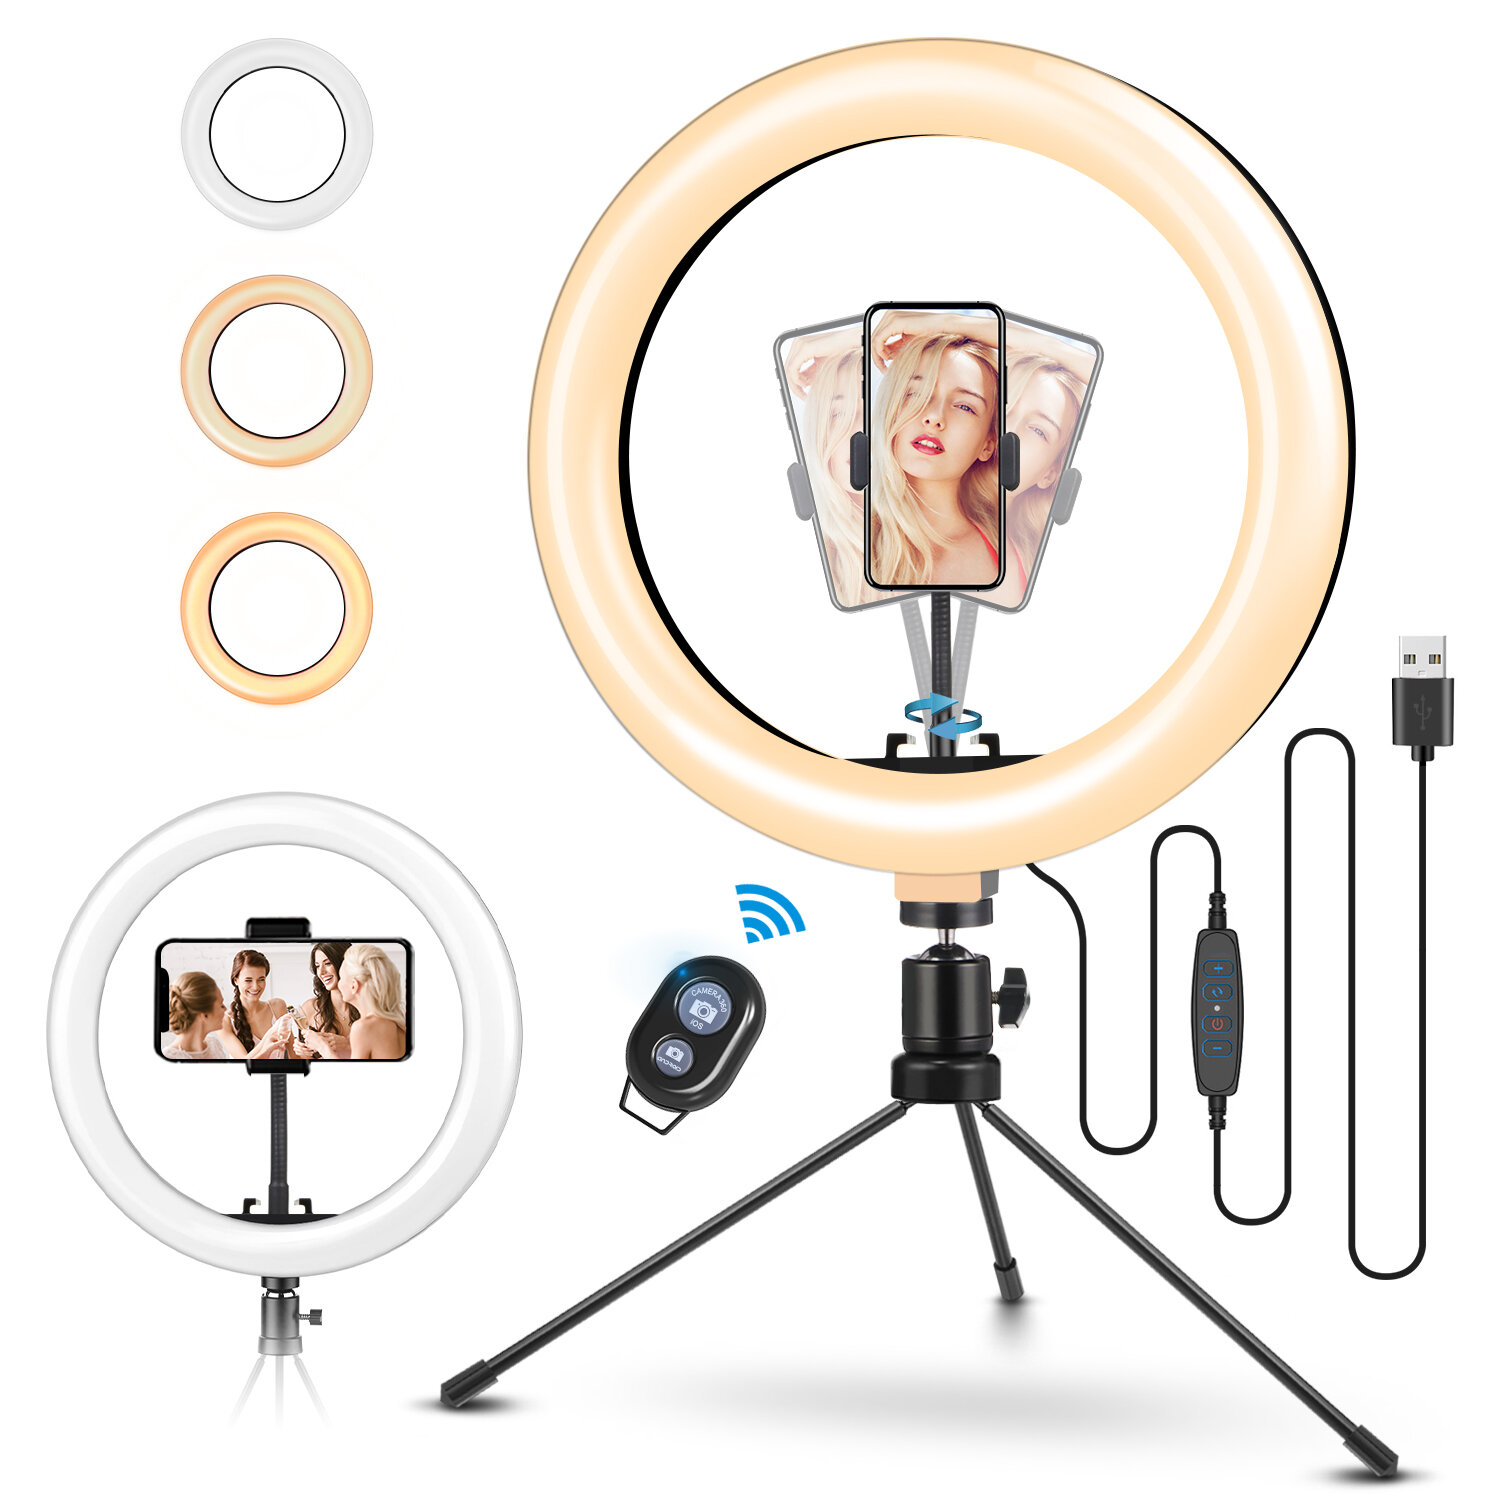 

ELEGIANT EGL-02S 10 inch 3 Color Modes Dimmable LED Ring Full Light Tripod Stand Live Selfie Holder with Remote Control